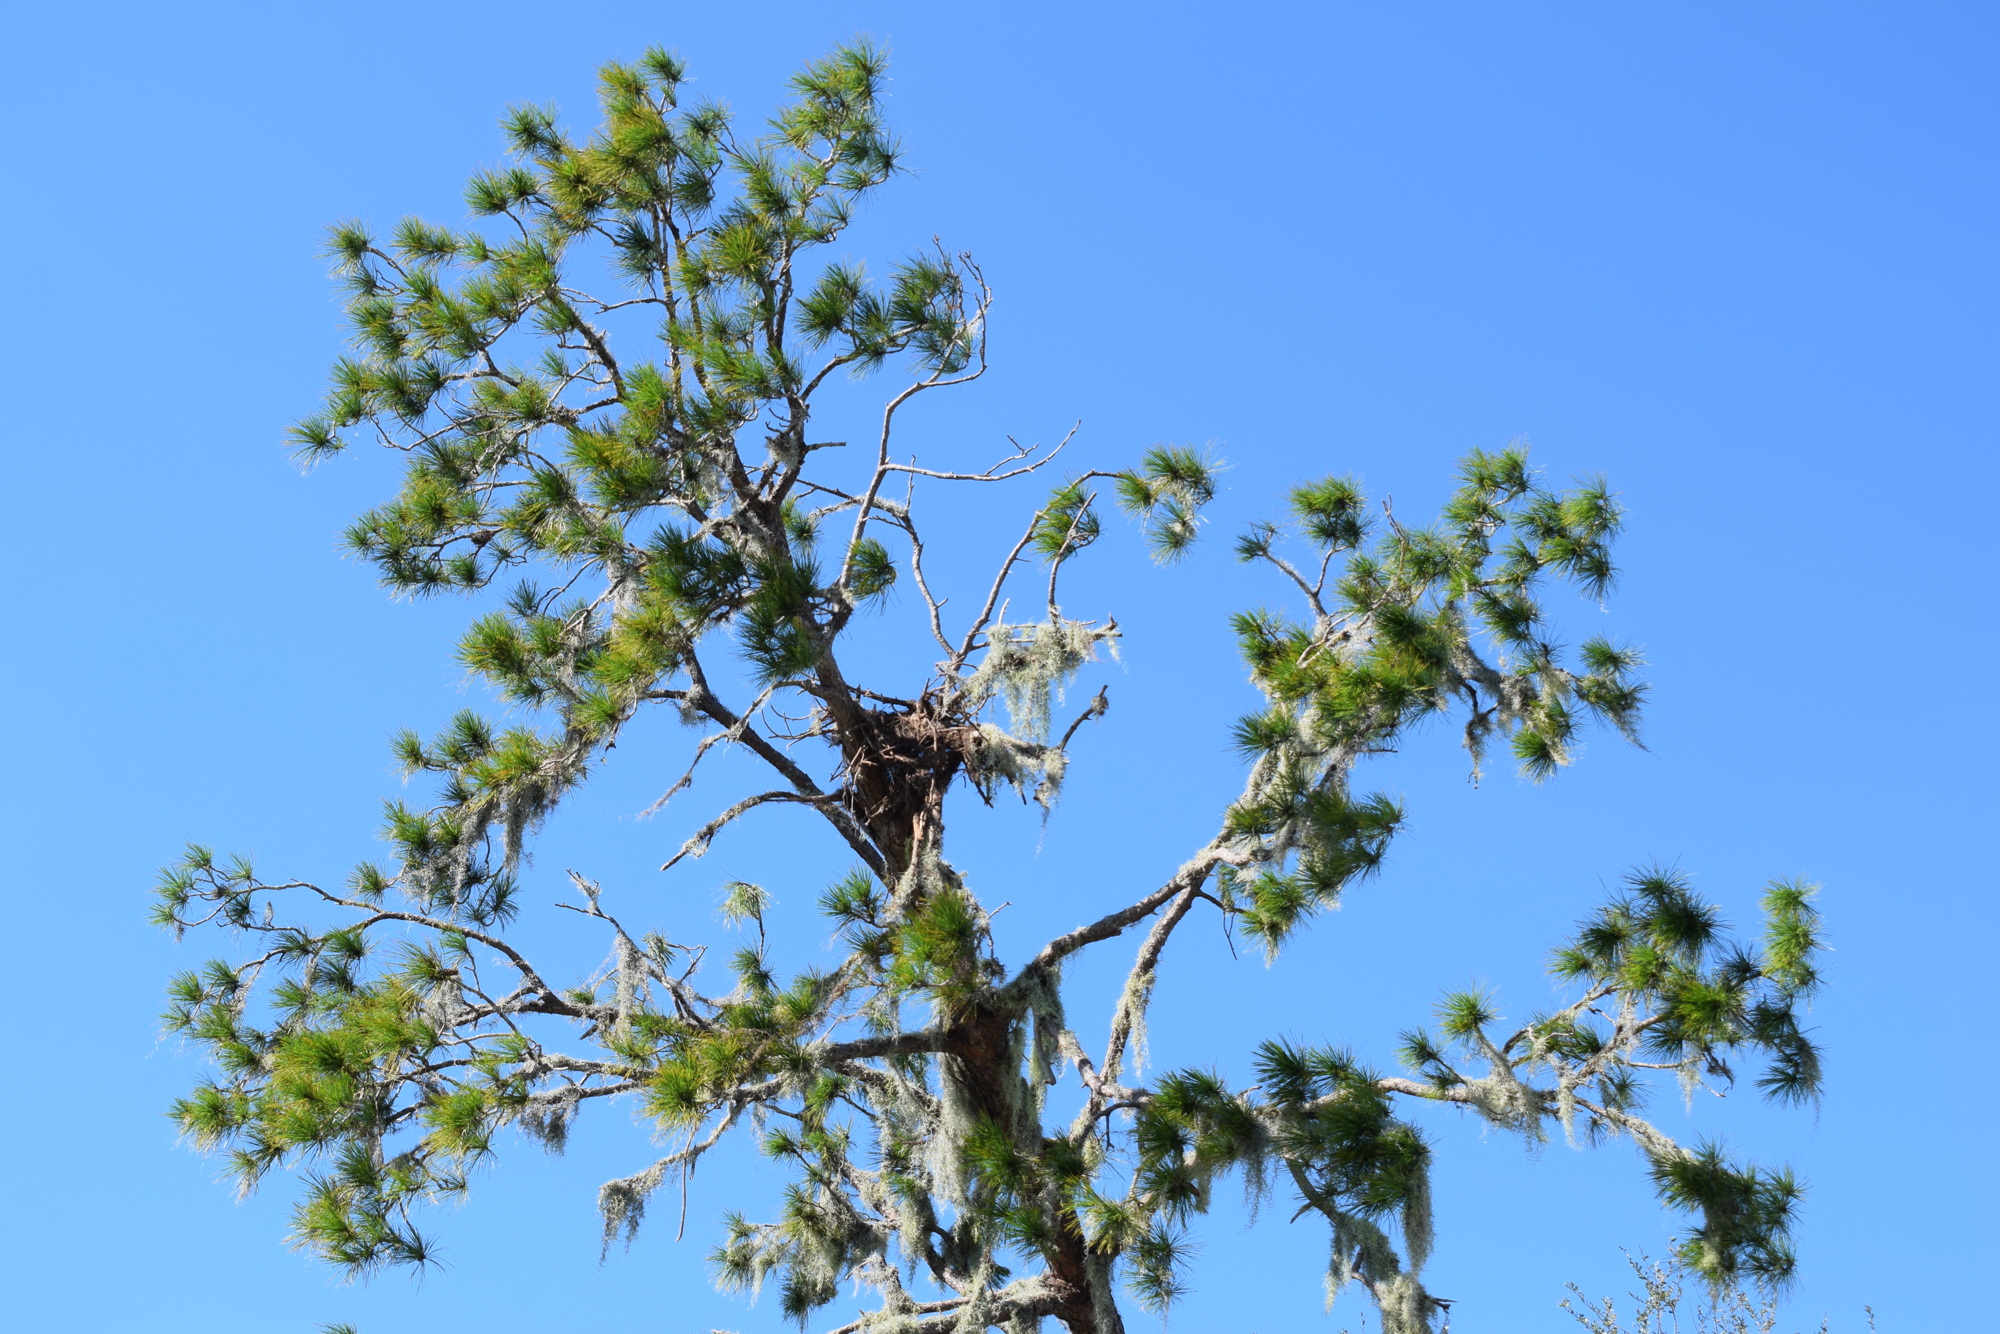 Only a small part of the bald eagles' nest that was in the tree remains after it fell due to Hurricane Ian.